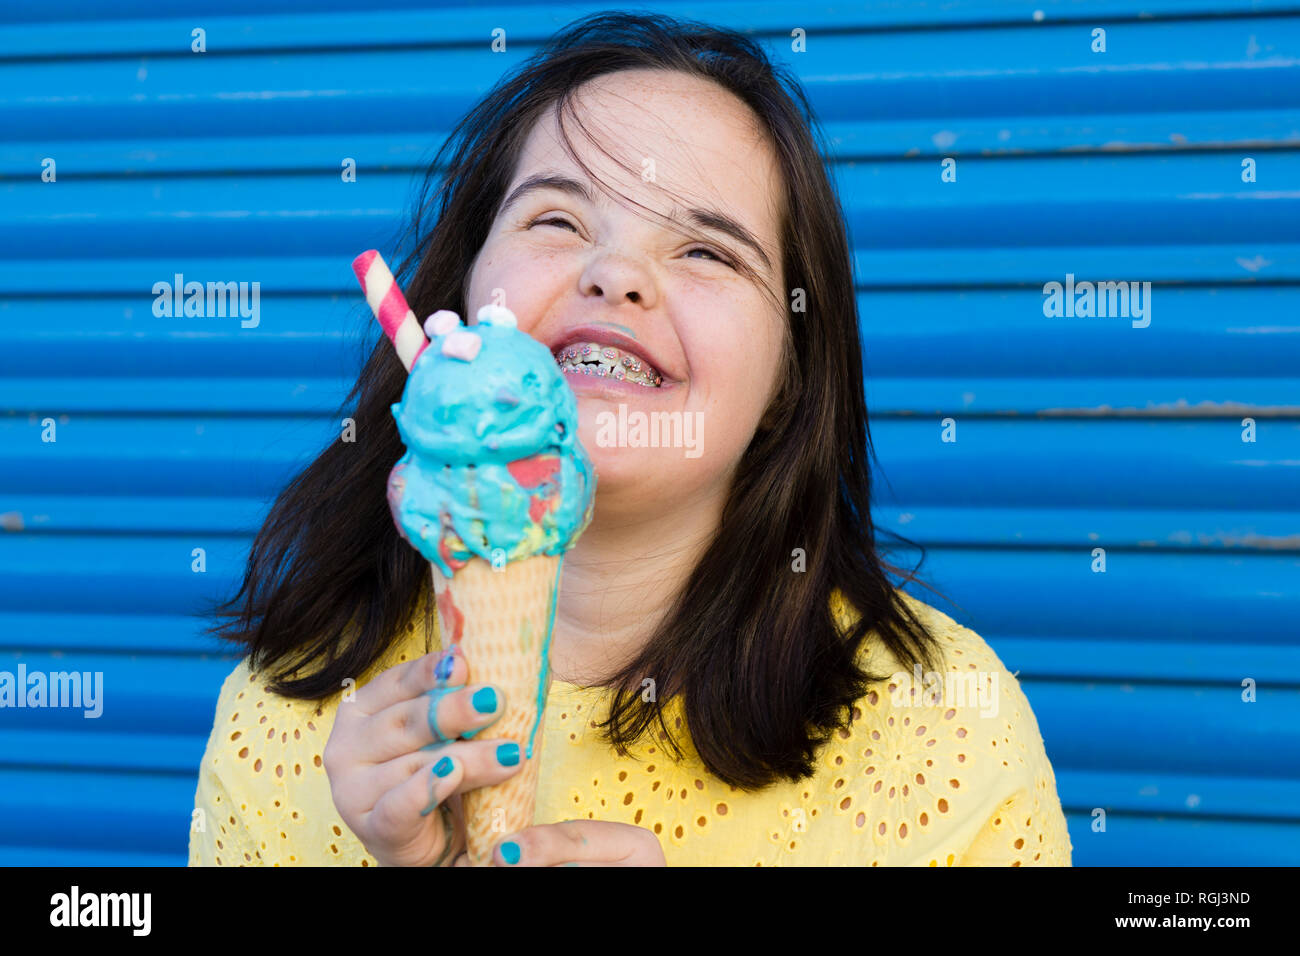 Teenager girl with down syndrome enjoying an ice cream Stock Photo